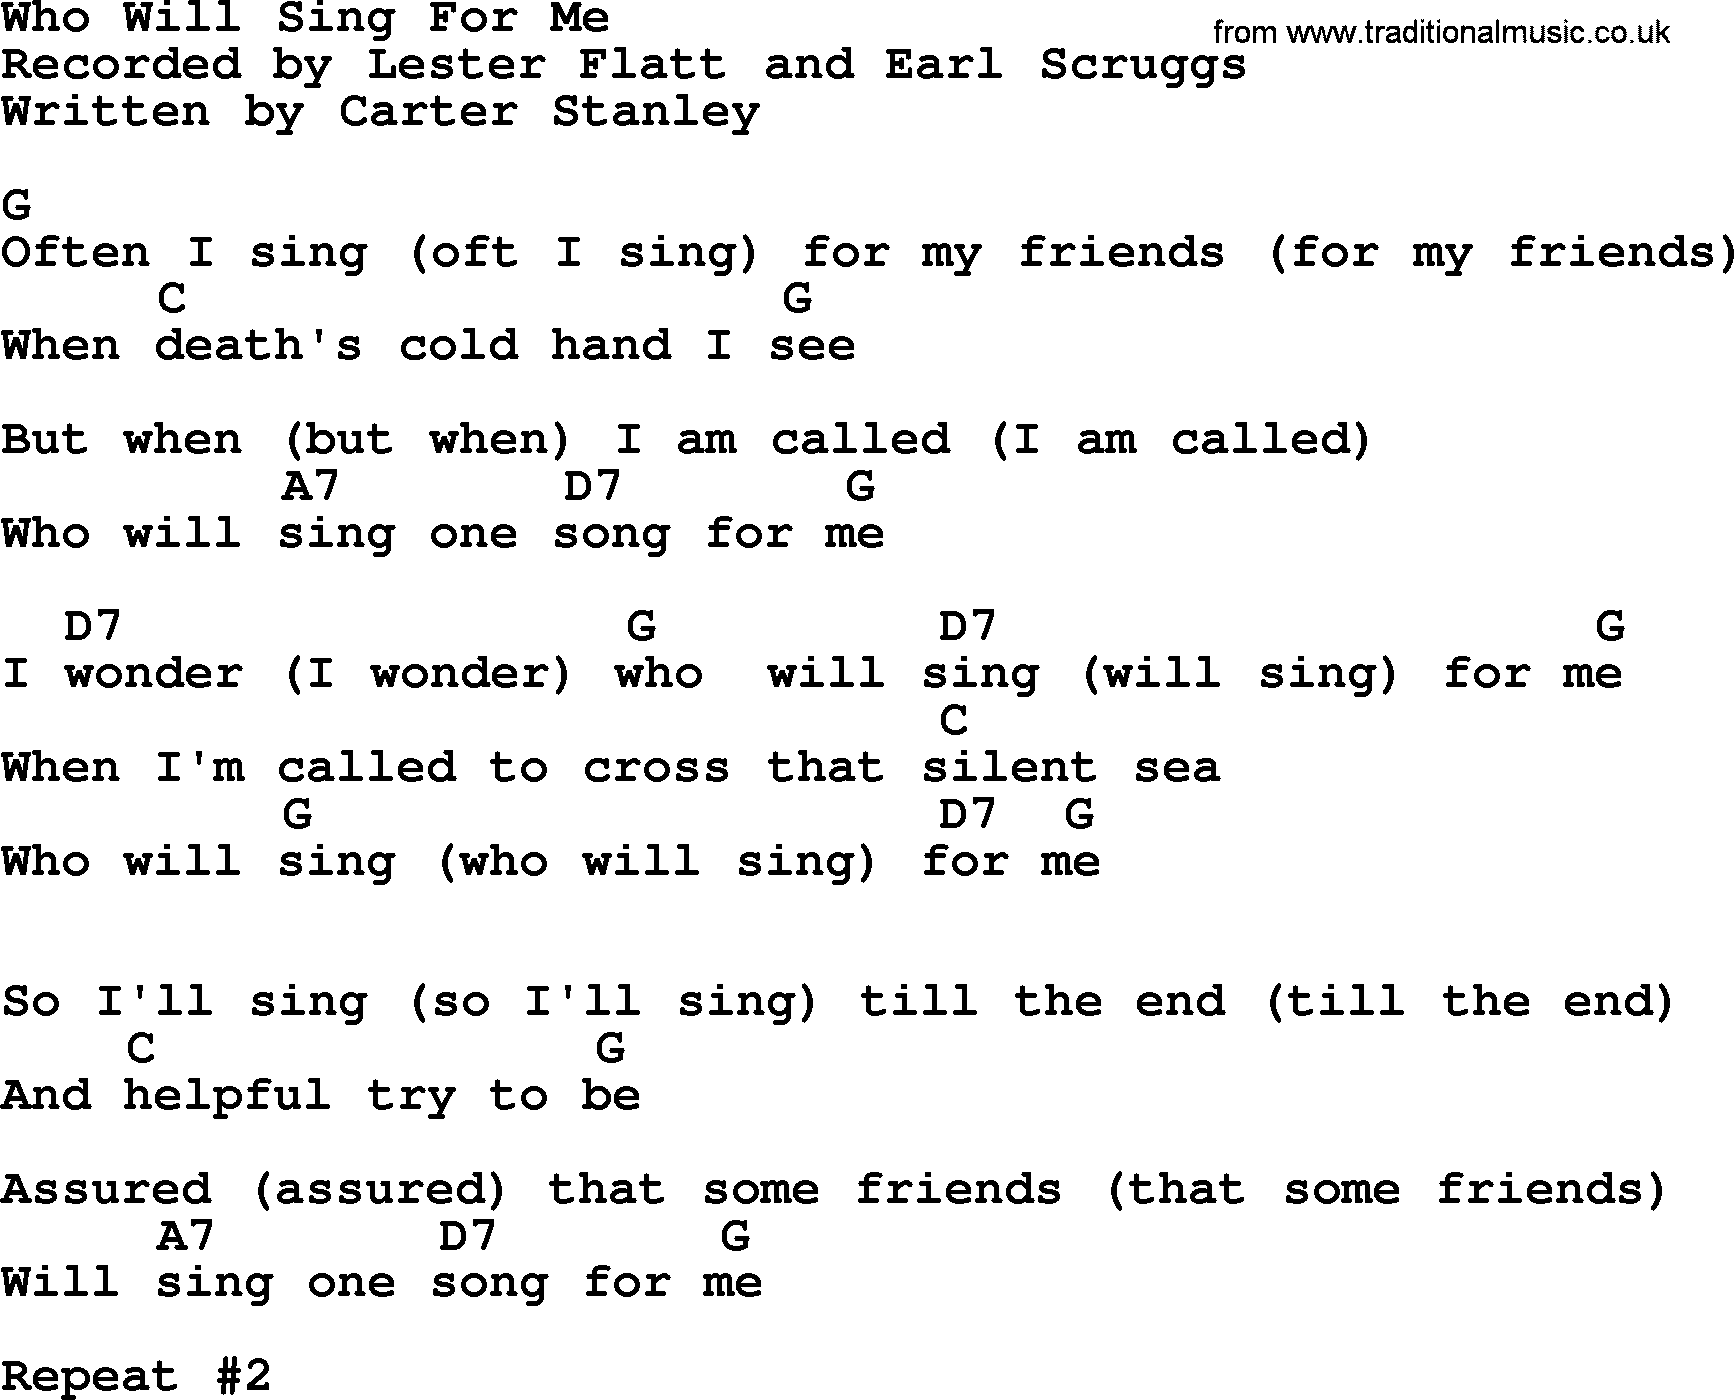 Bluegrass song: Who Will Sing For Me, lyrics and chords